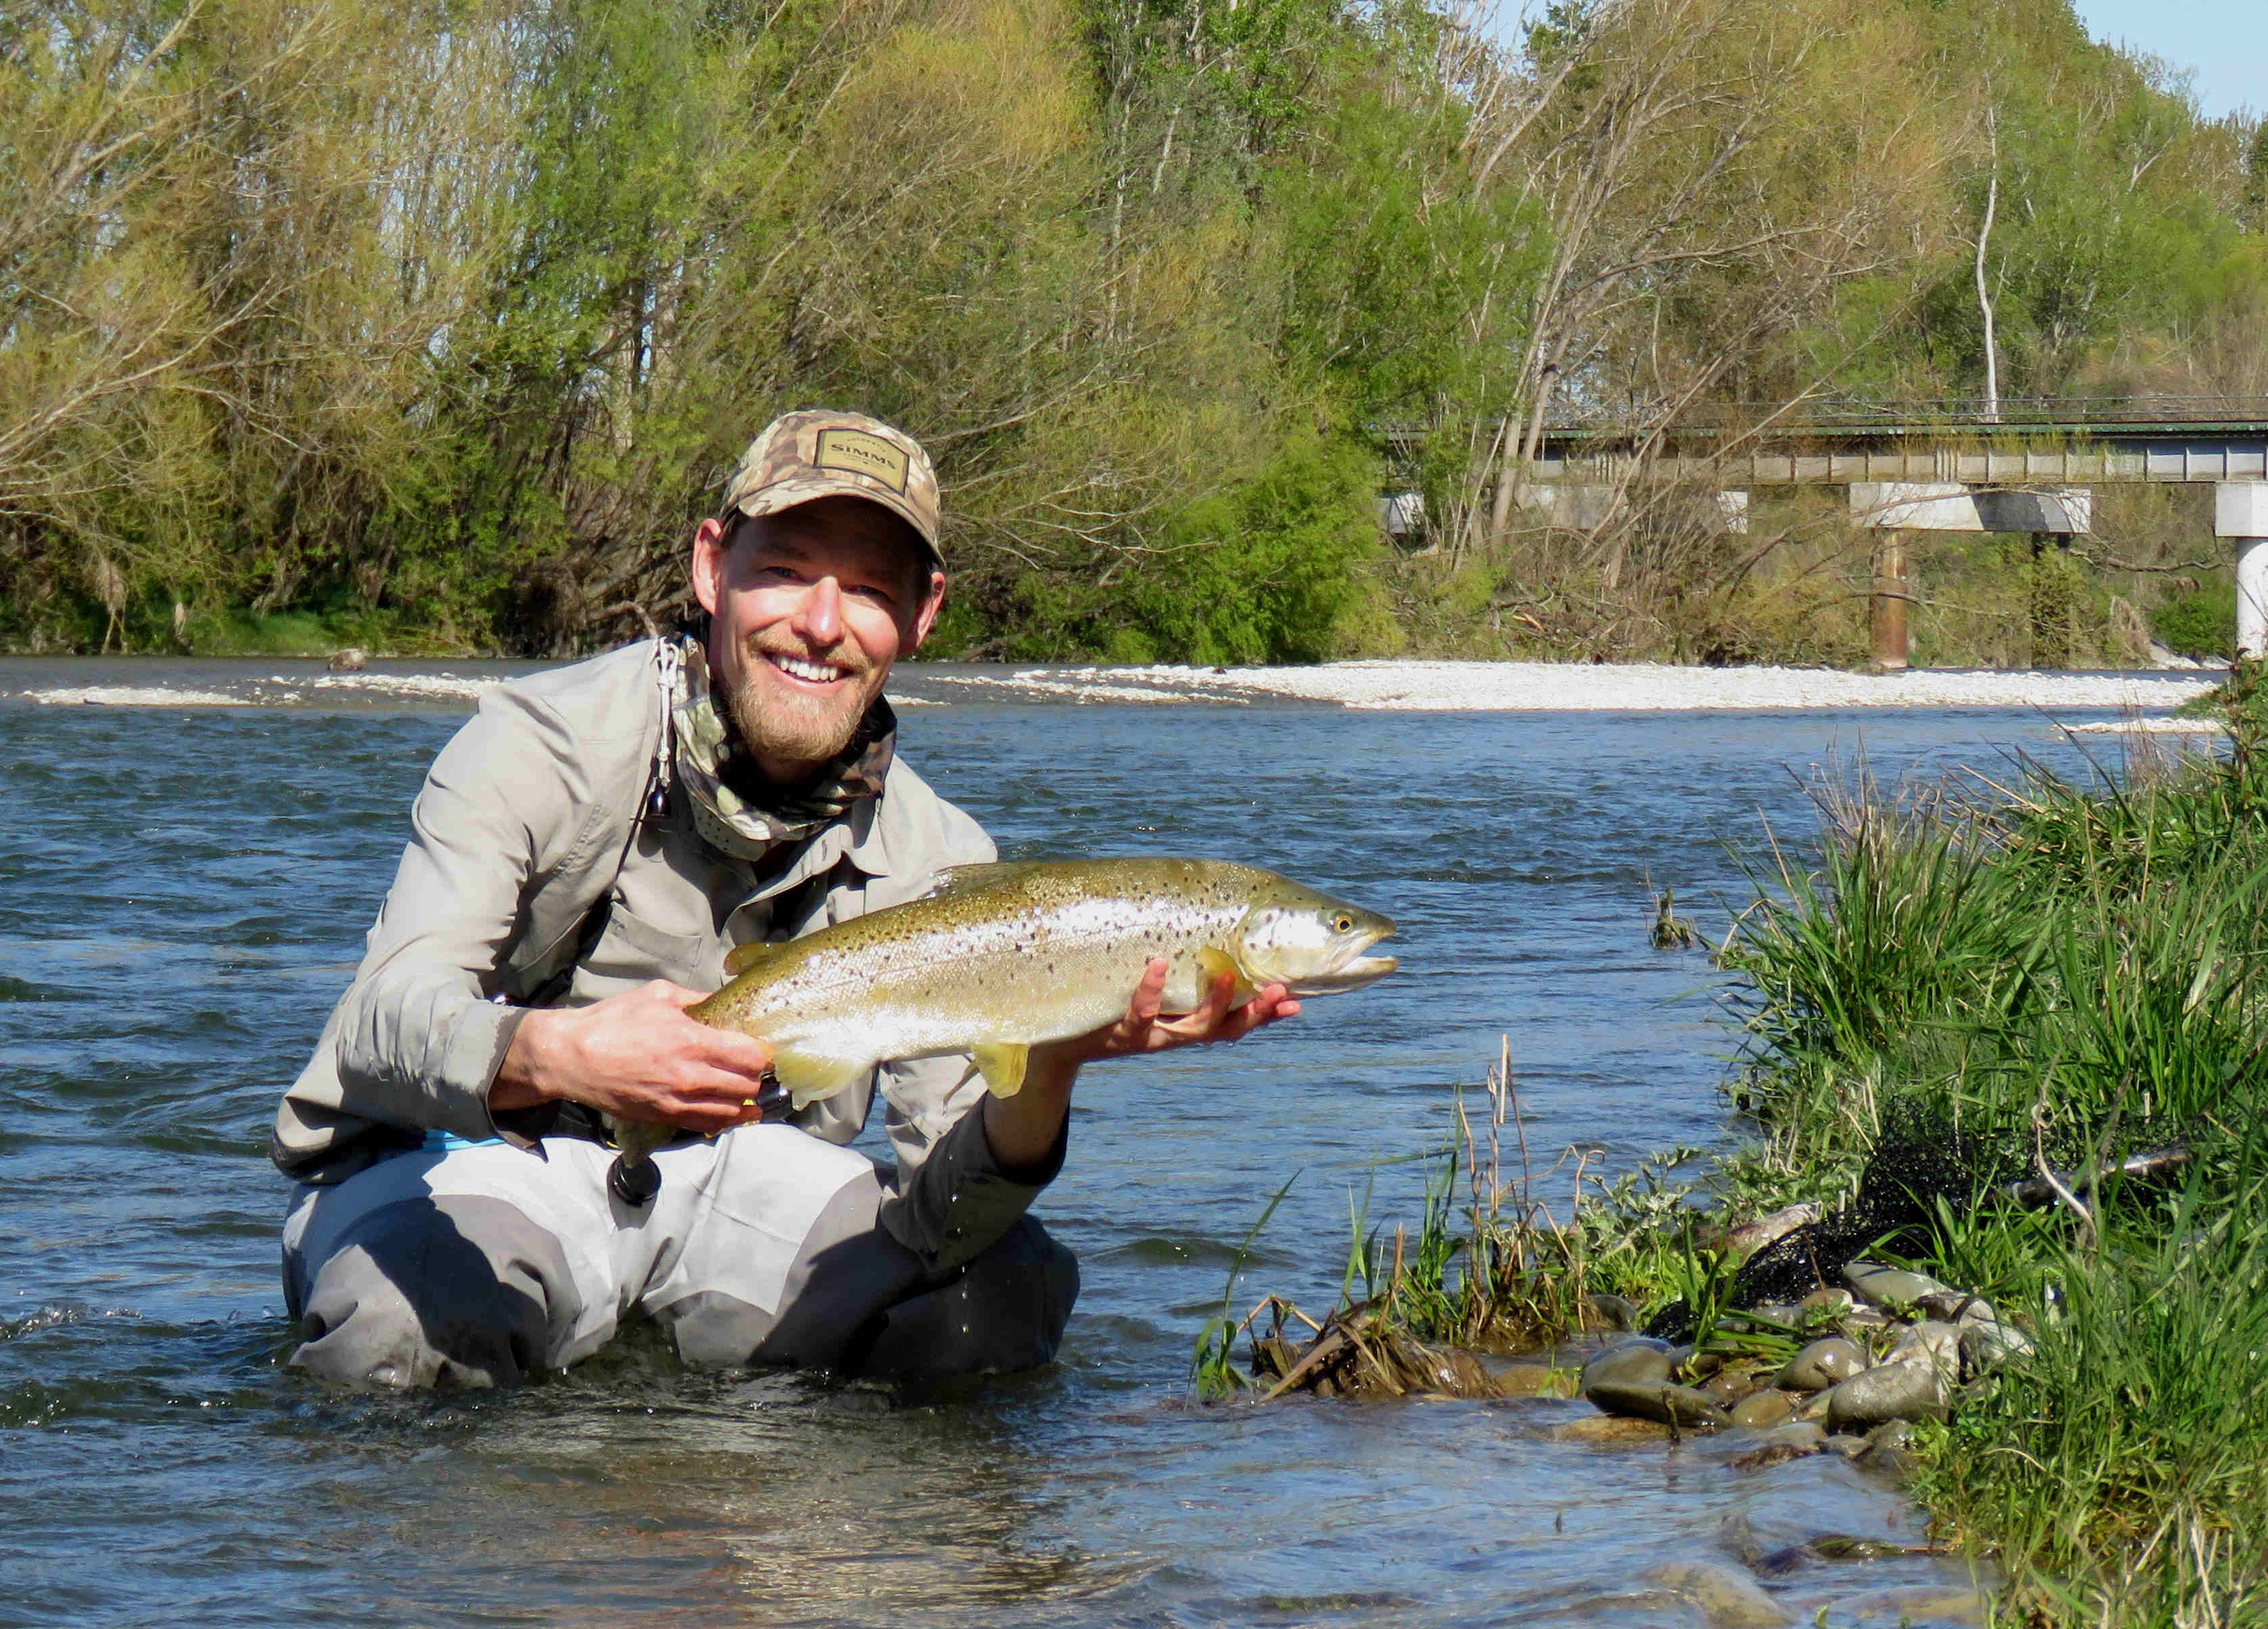 RL Sept22 CSI 2 Rhys Adams with a large brown trout caught at the Opihi Riveron Opening Day 2021